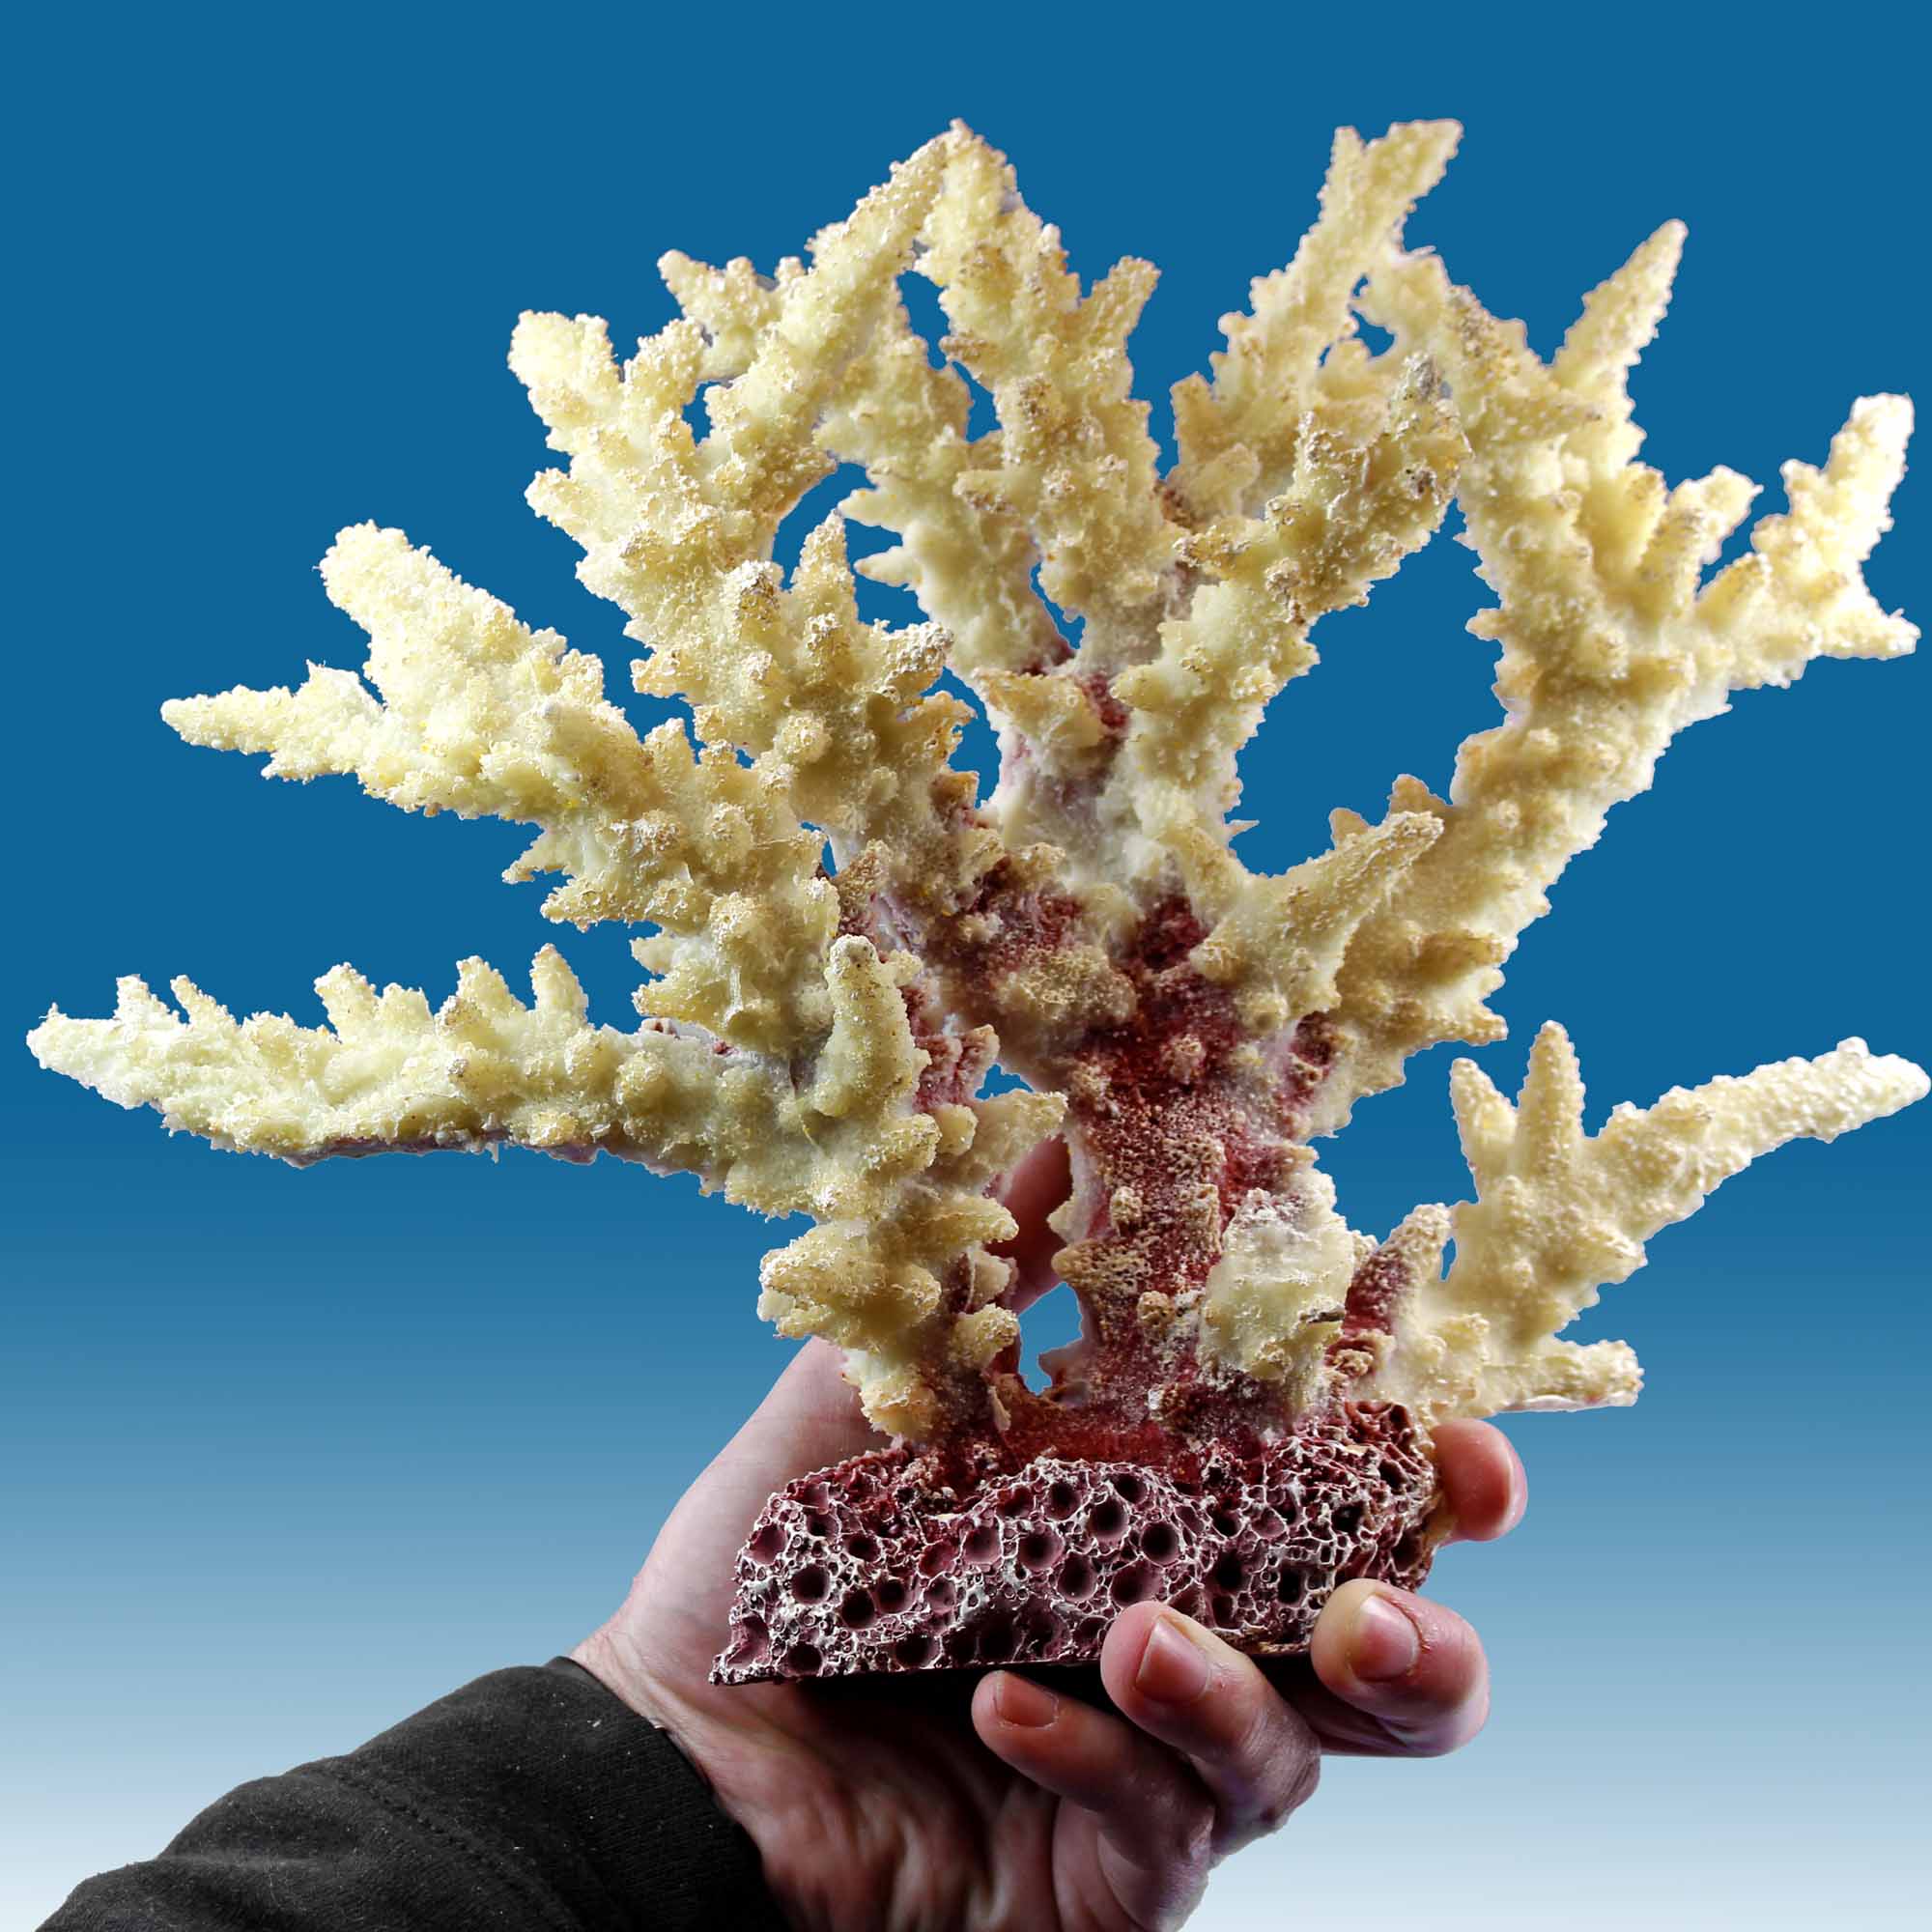 Natural White Coral Cluster Crystal Aquarium Landscaping Ornaments